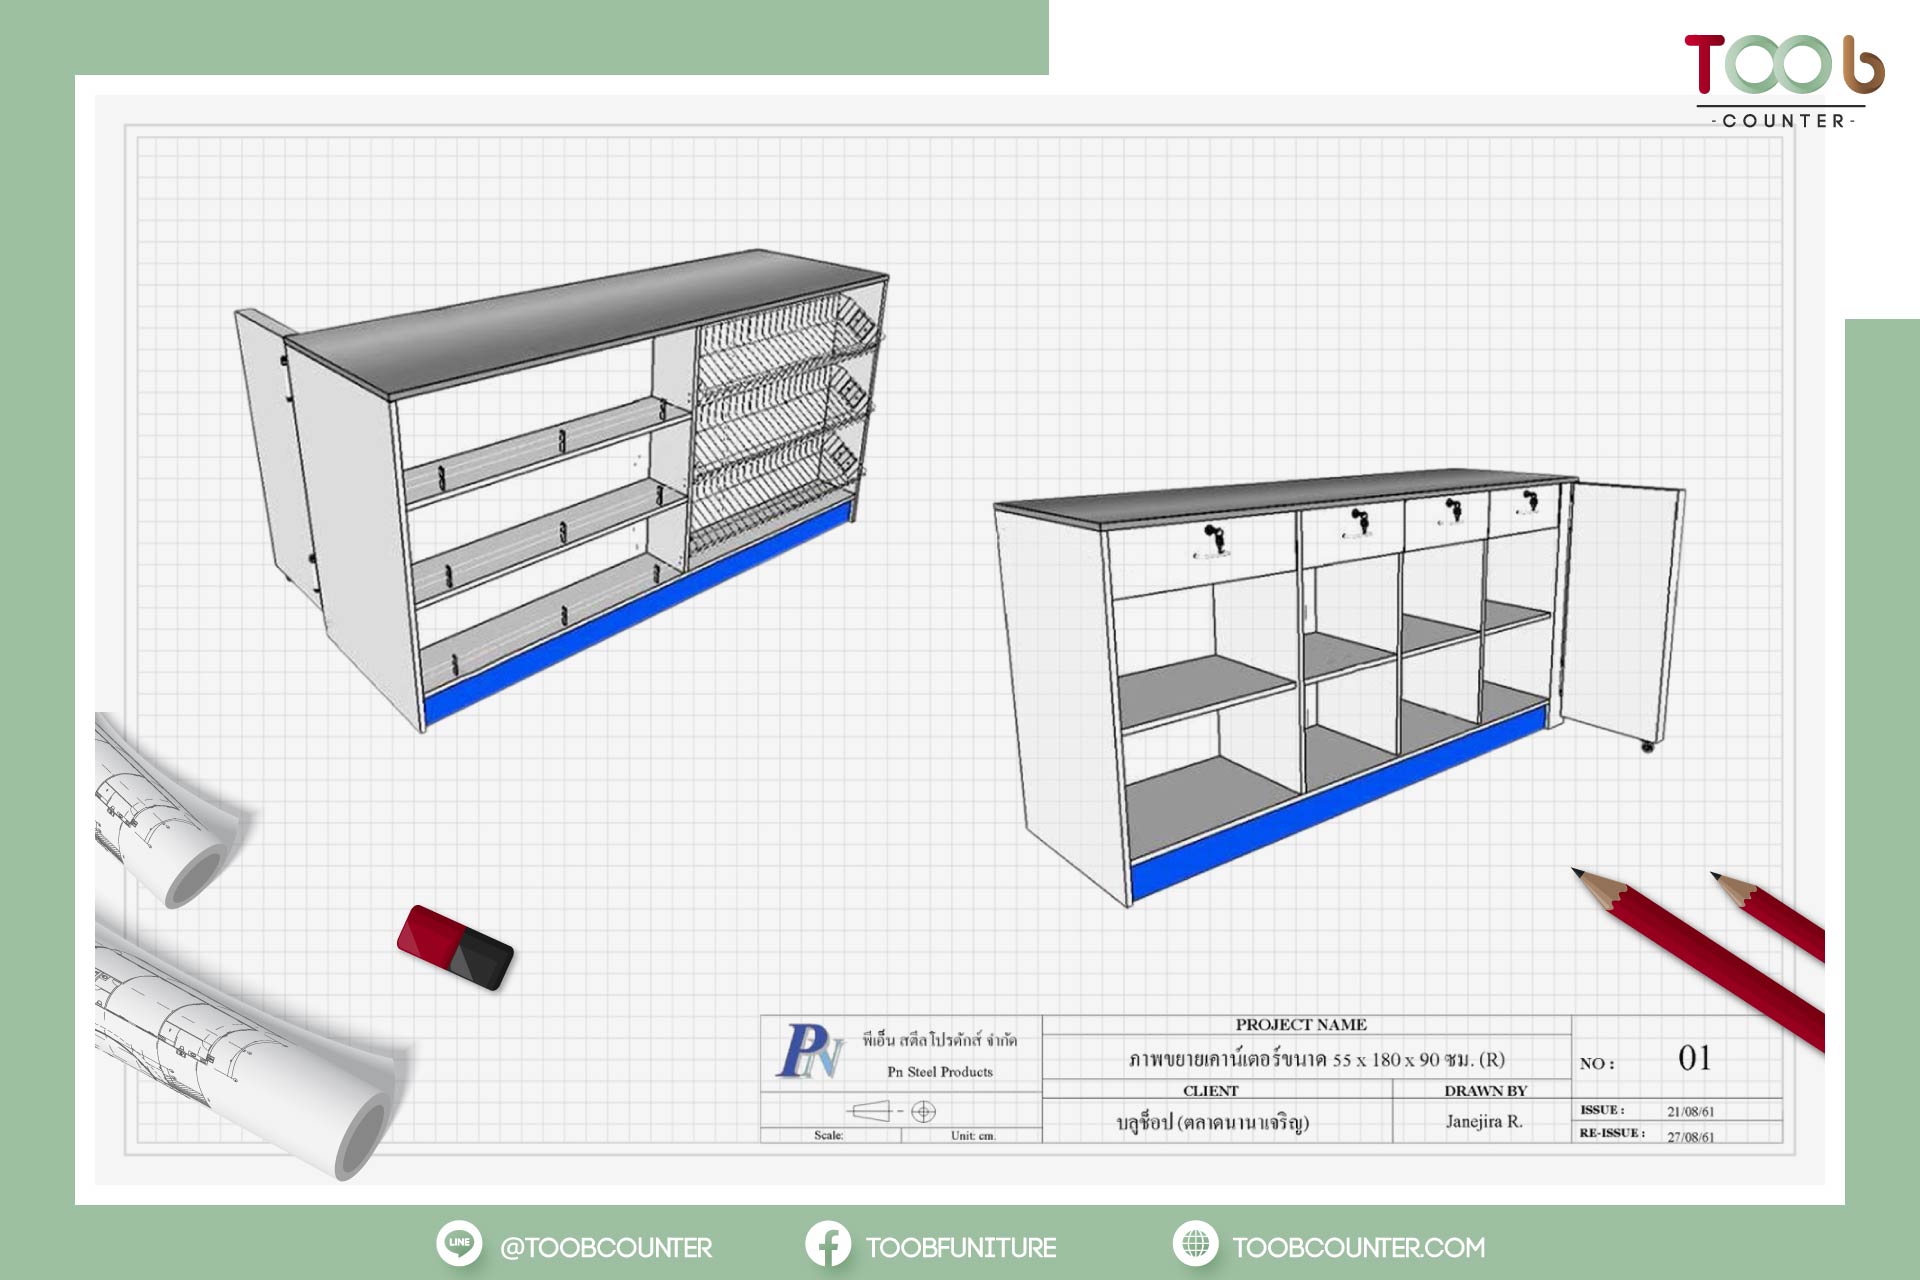 Drawing perspective view design small i shaped blue cashier counter